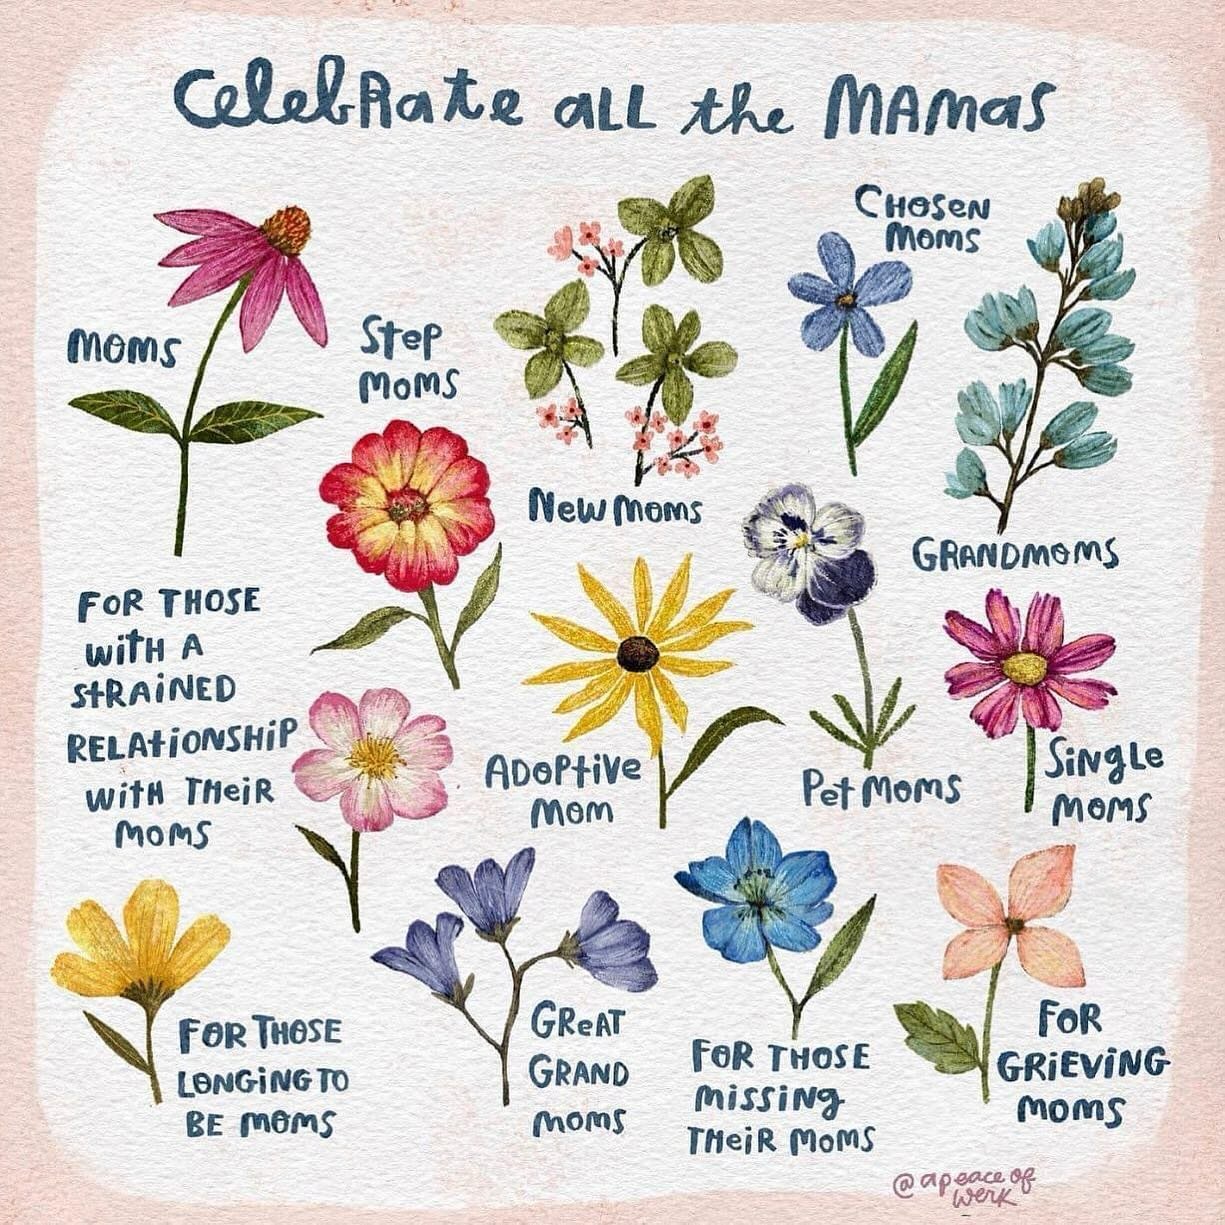 Happy Mother&rsquo;s Day to all our favorite moms and caregivers on this special day! &hearts;️🌺💐🌸🌻